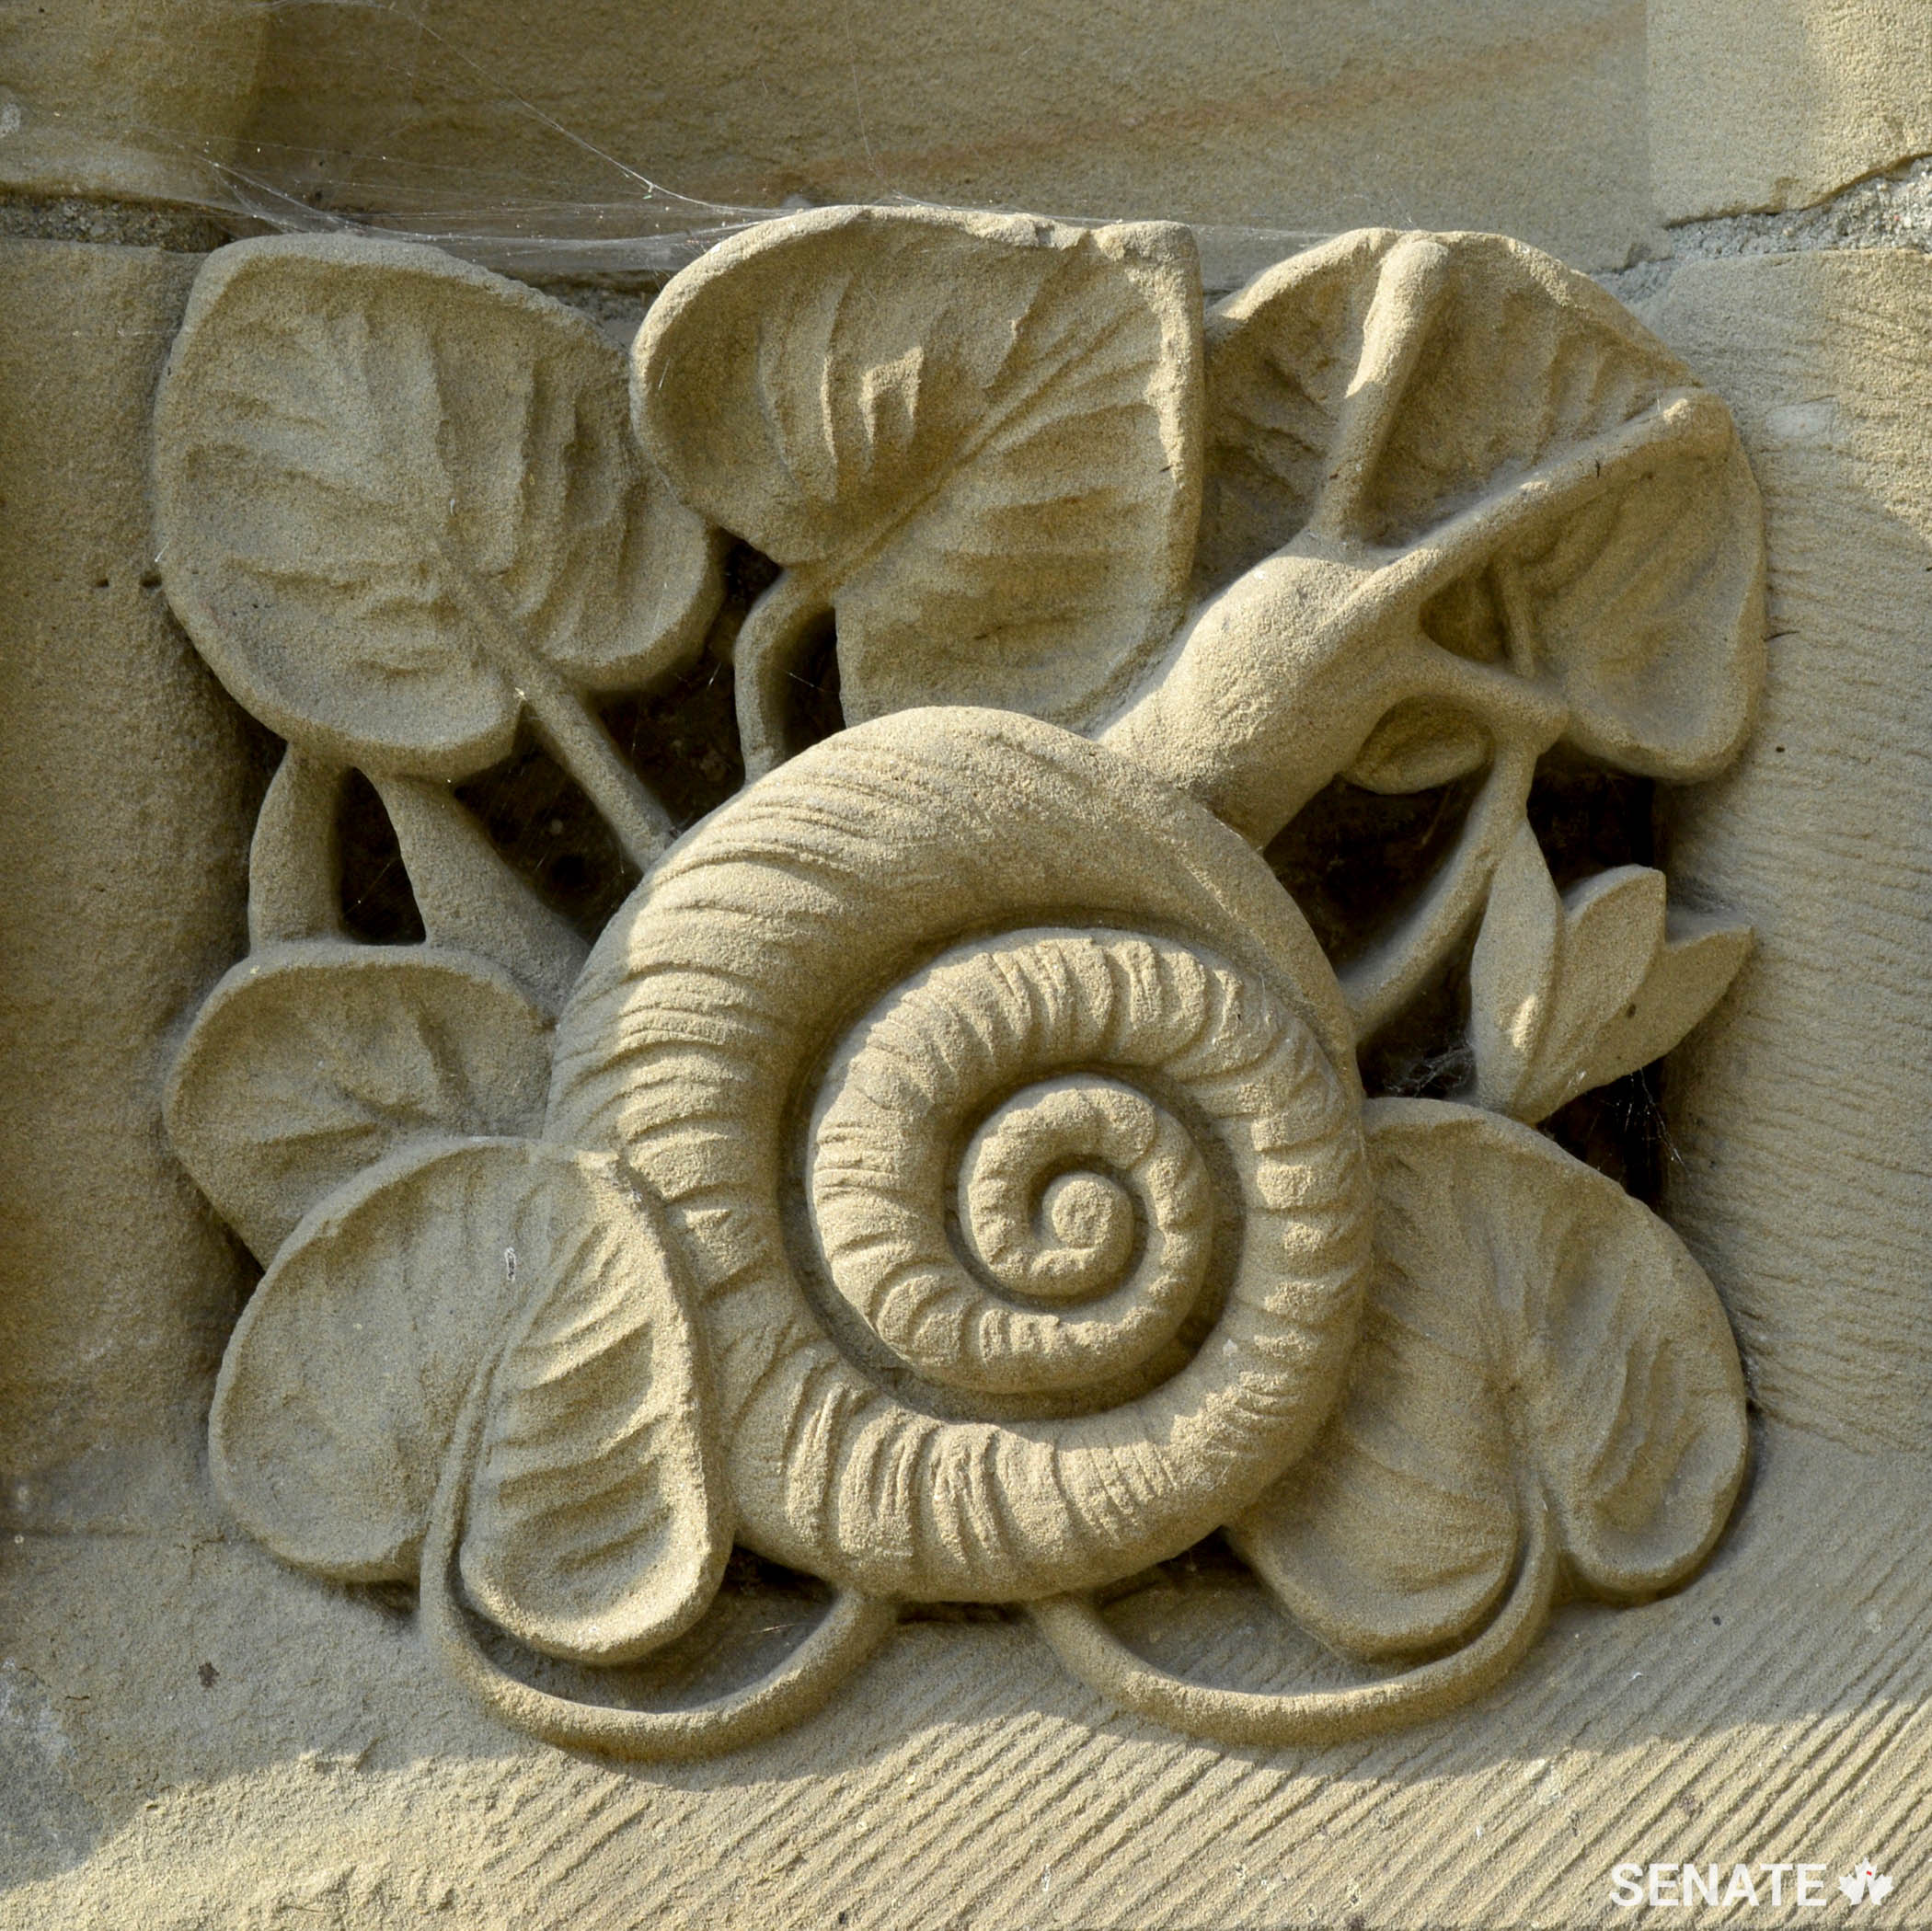 A relief panel depicting a snail adorns the base of the Peace Tower.